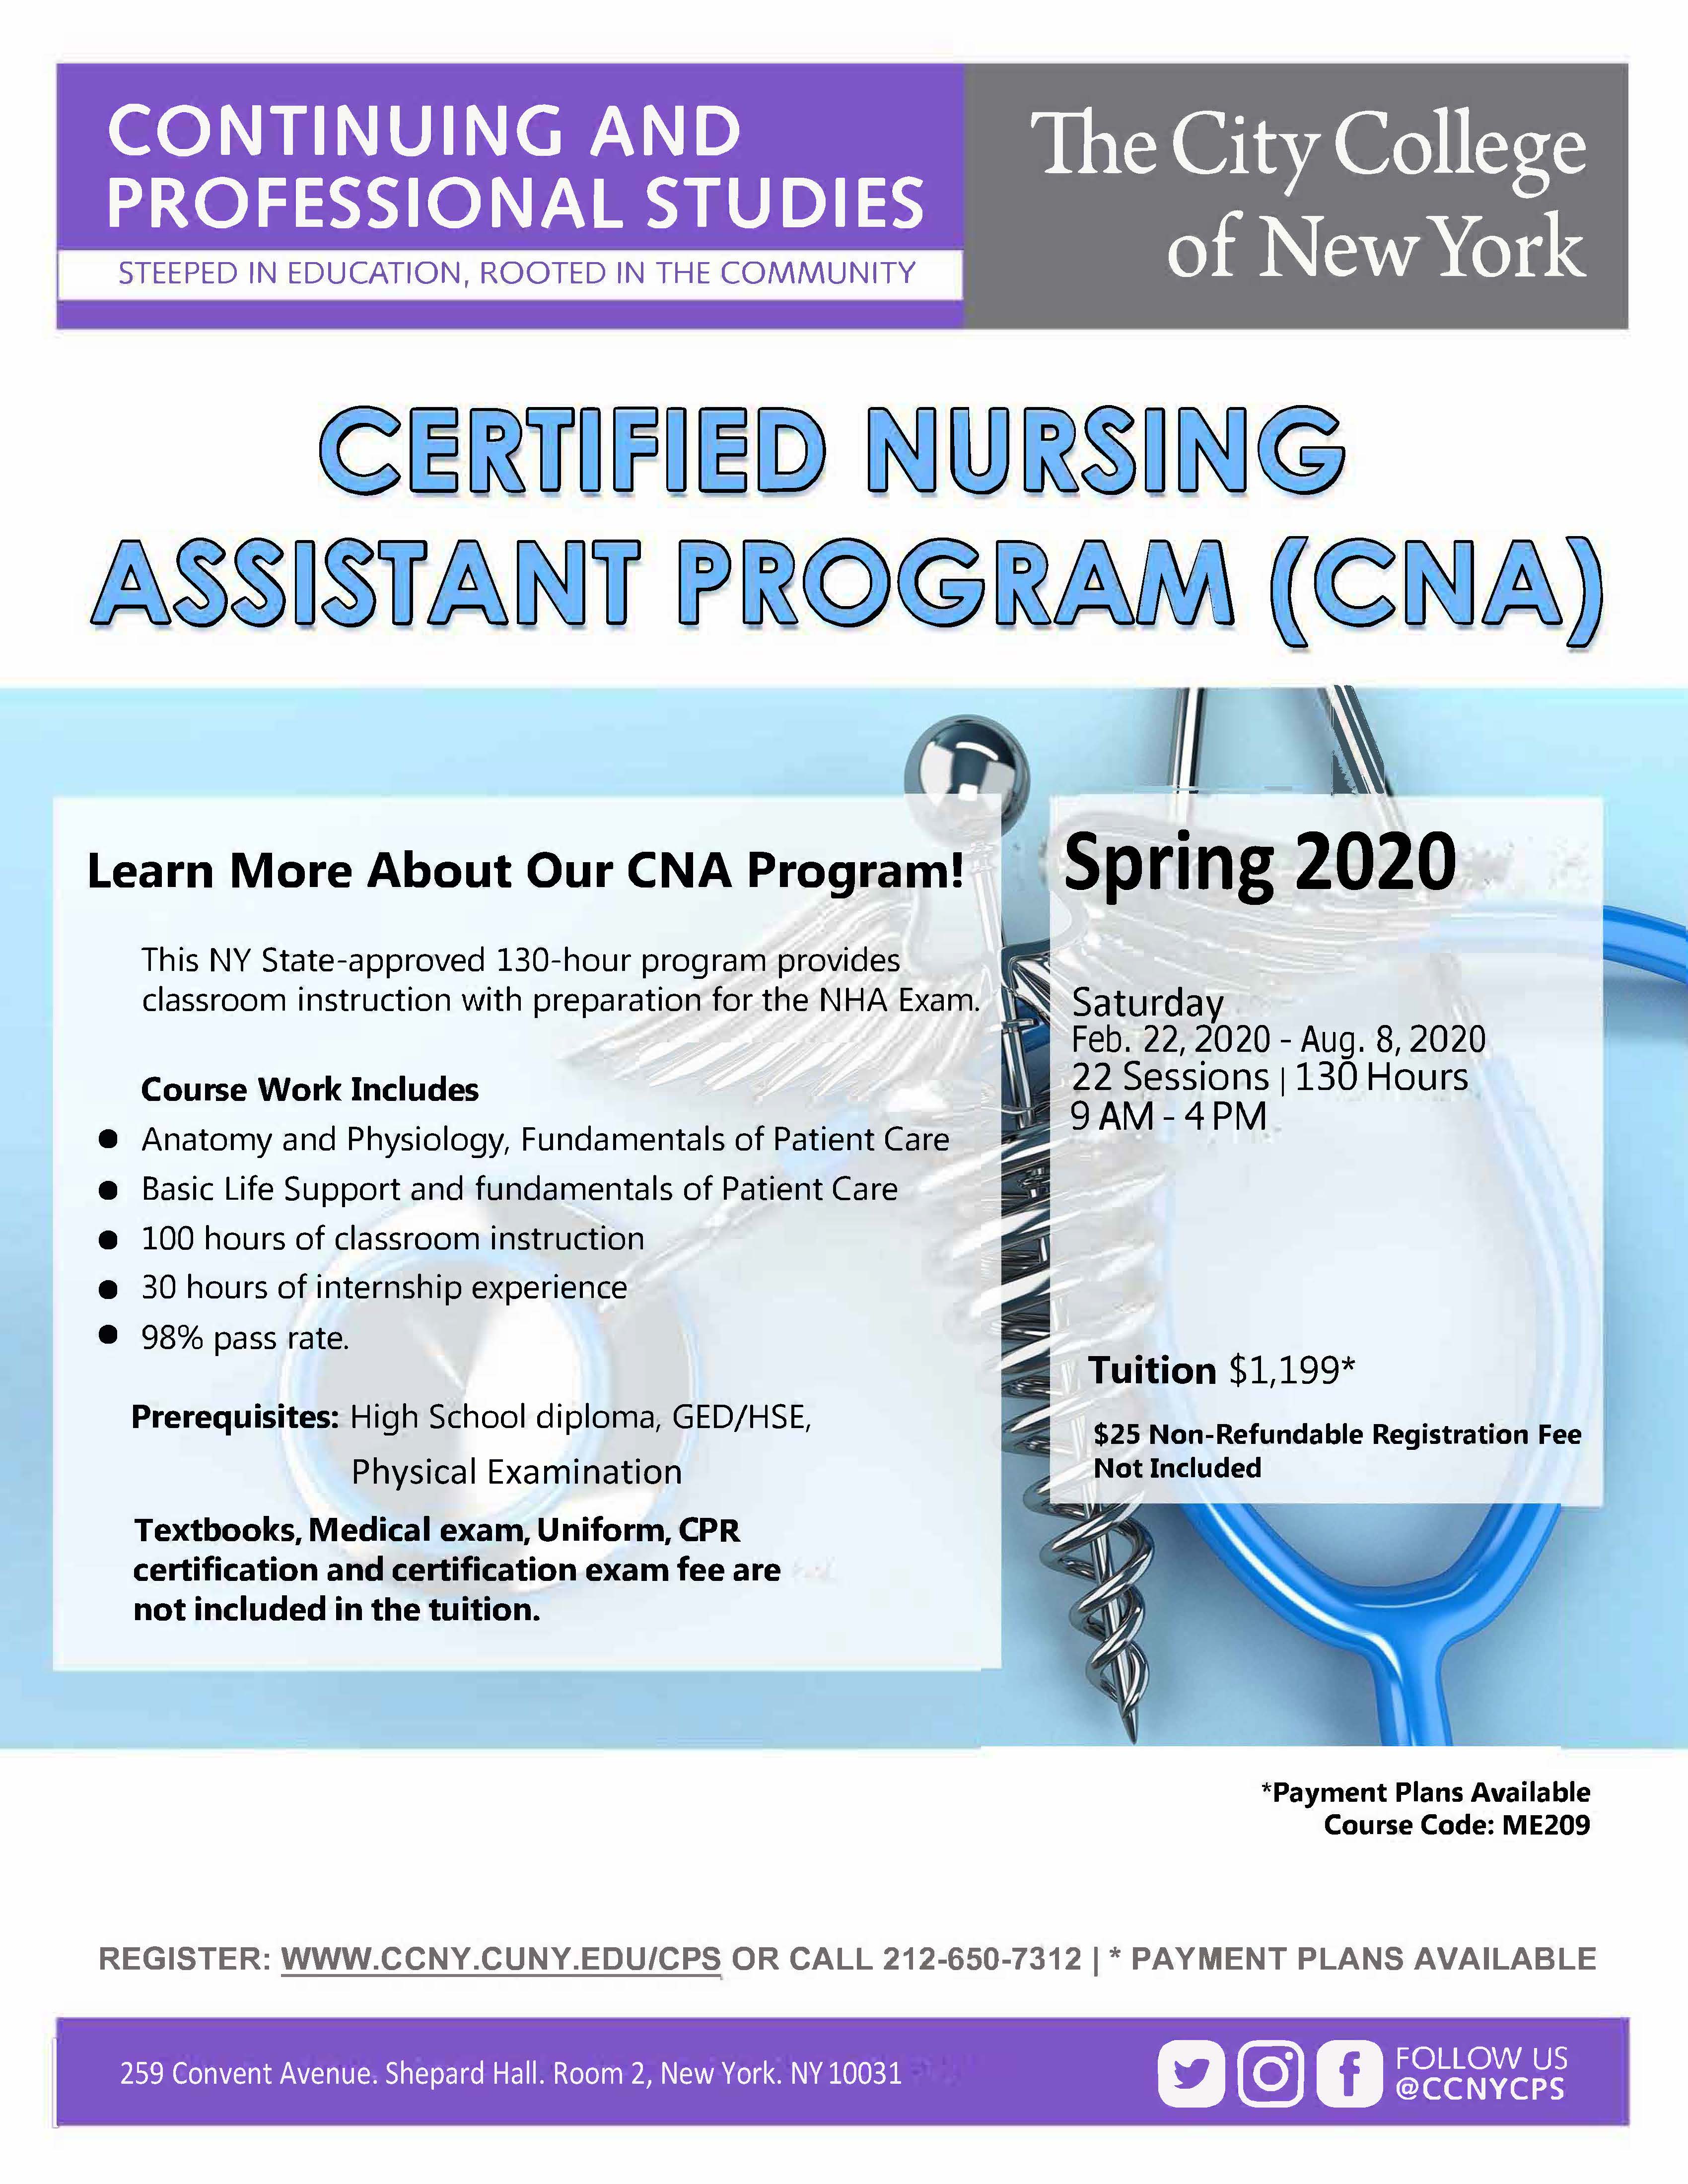 Certified Nursing Assistant (CNA) The City College of New York